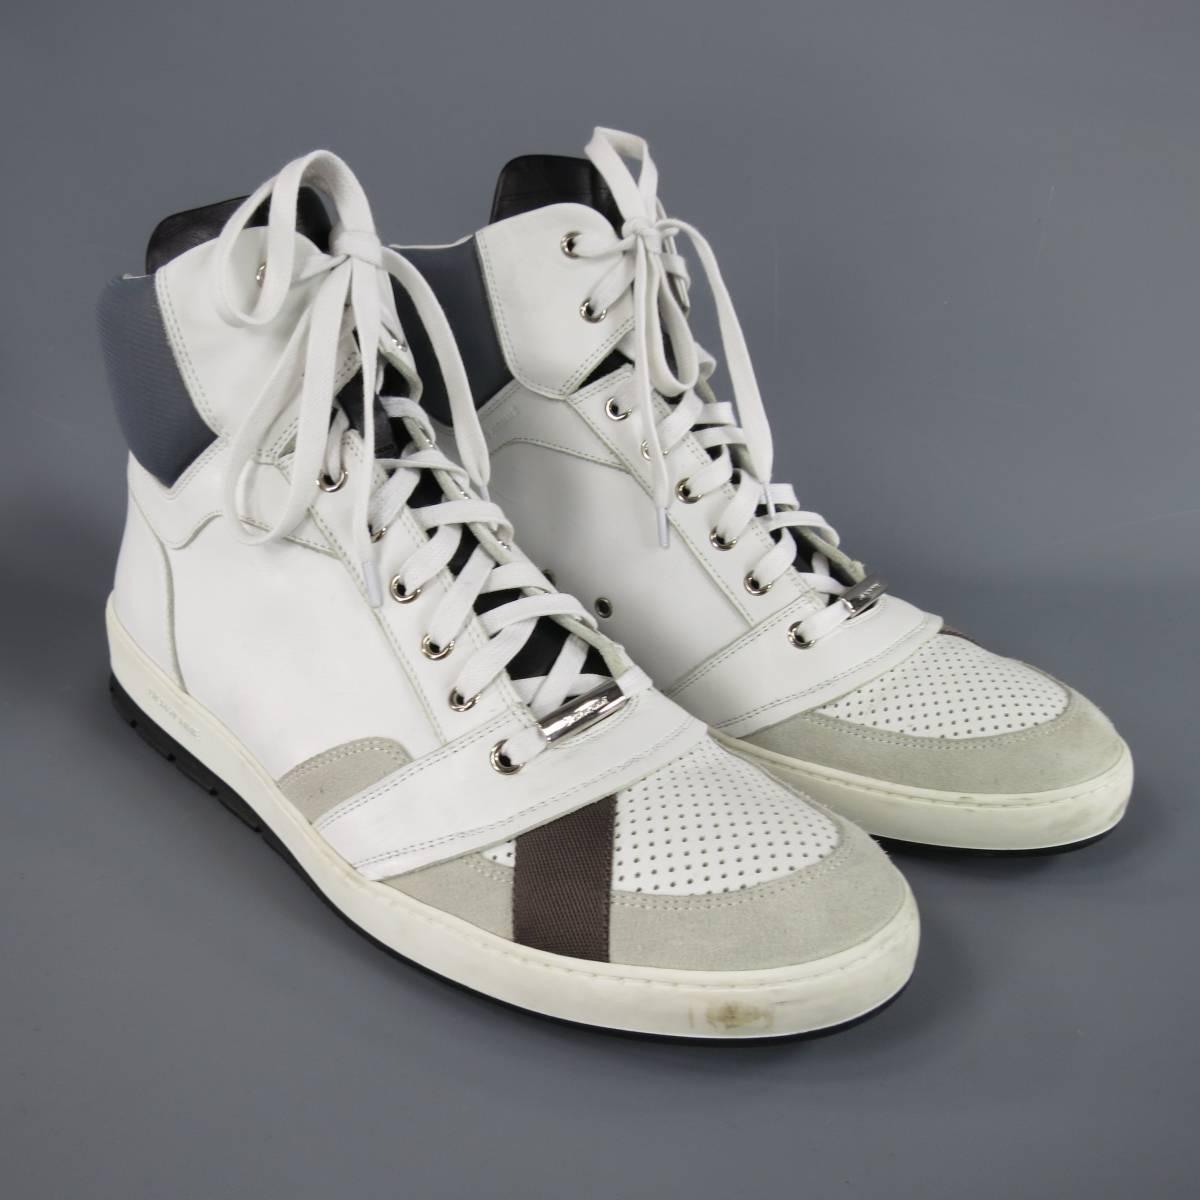 DIOR HOMME white smooth leather high top sneakers featuring a perforated toe box with brown ribbon dteail, beige suede panels, black leather tongue, silver tone engraved lace lock, gray padded ankle, and black sole with white midsole. Minor wear